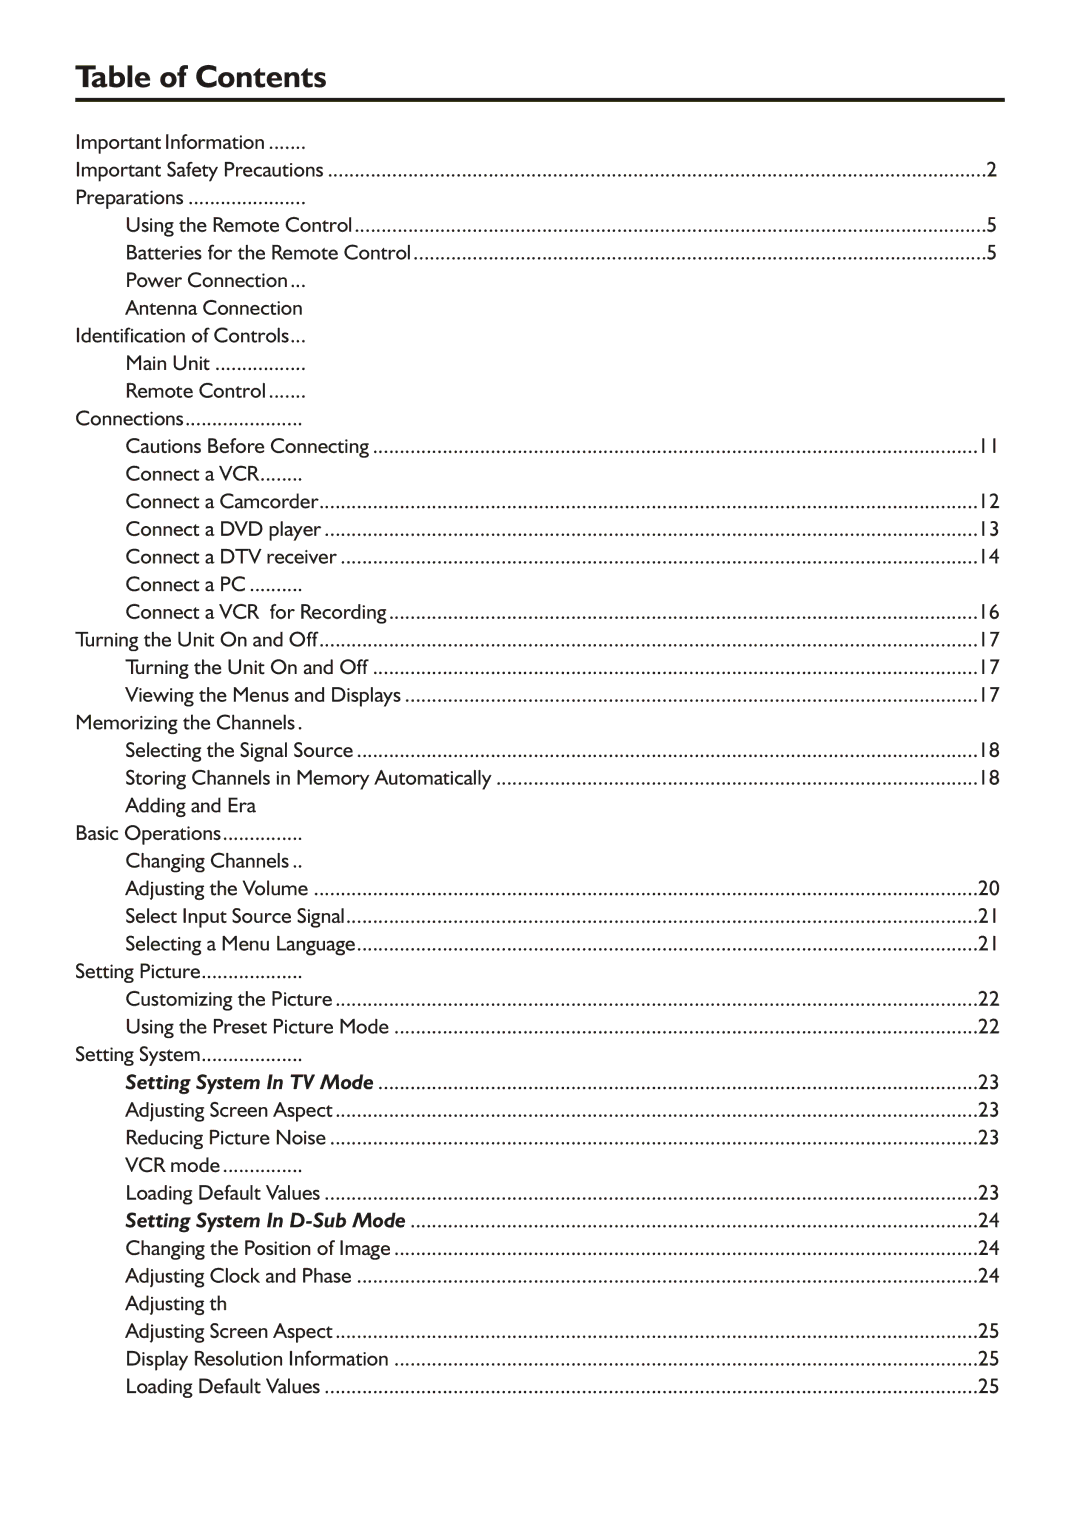 Audiovox FPE2305 manual Table of Contents 